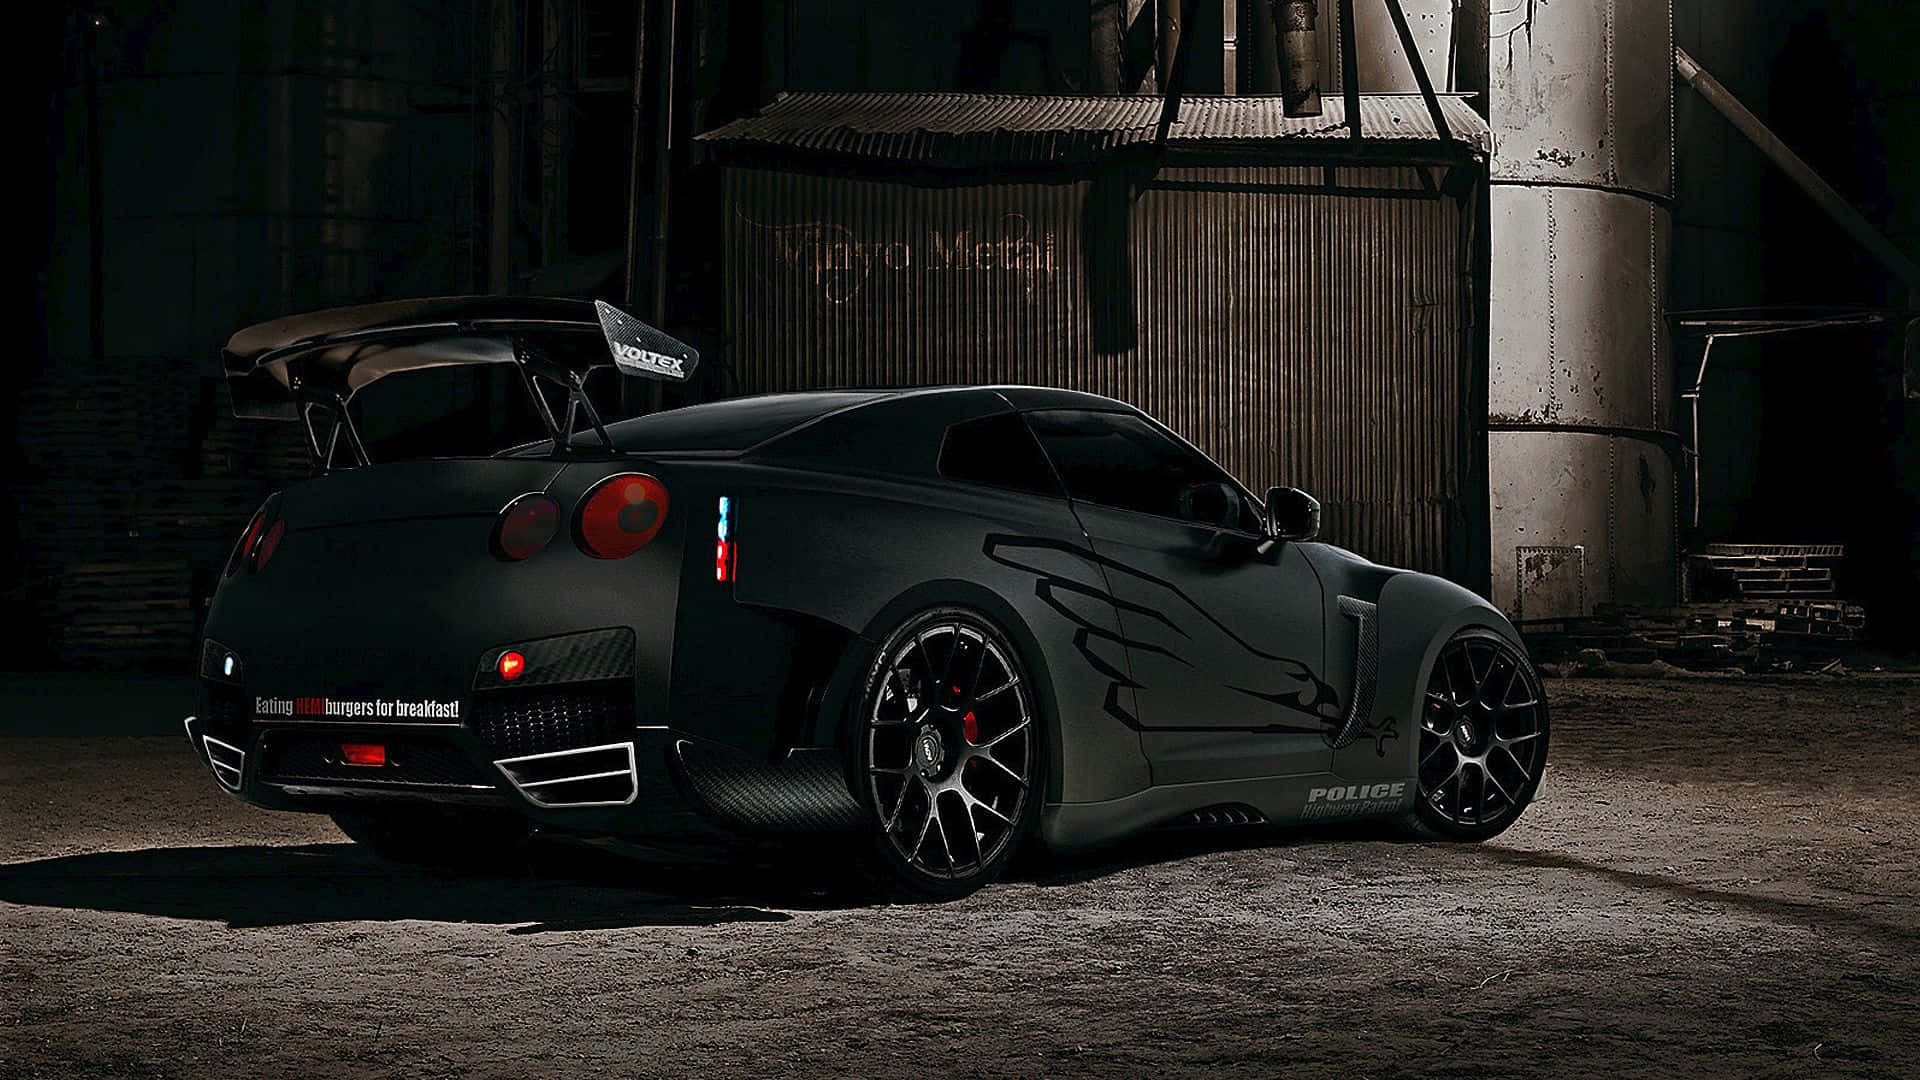 Cruise Down The Highway In Style With This Cool Gtr